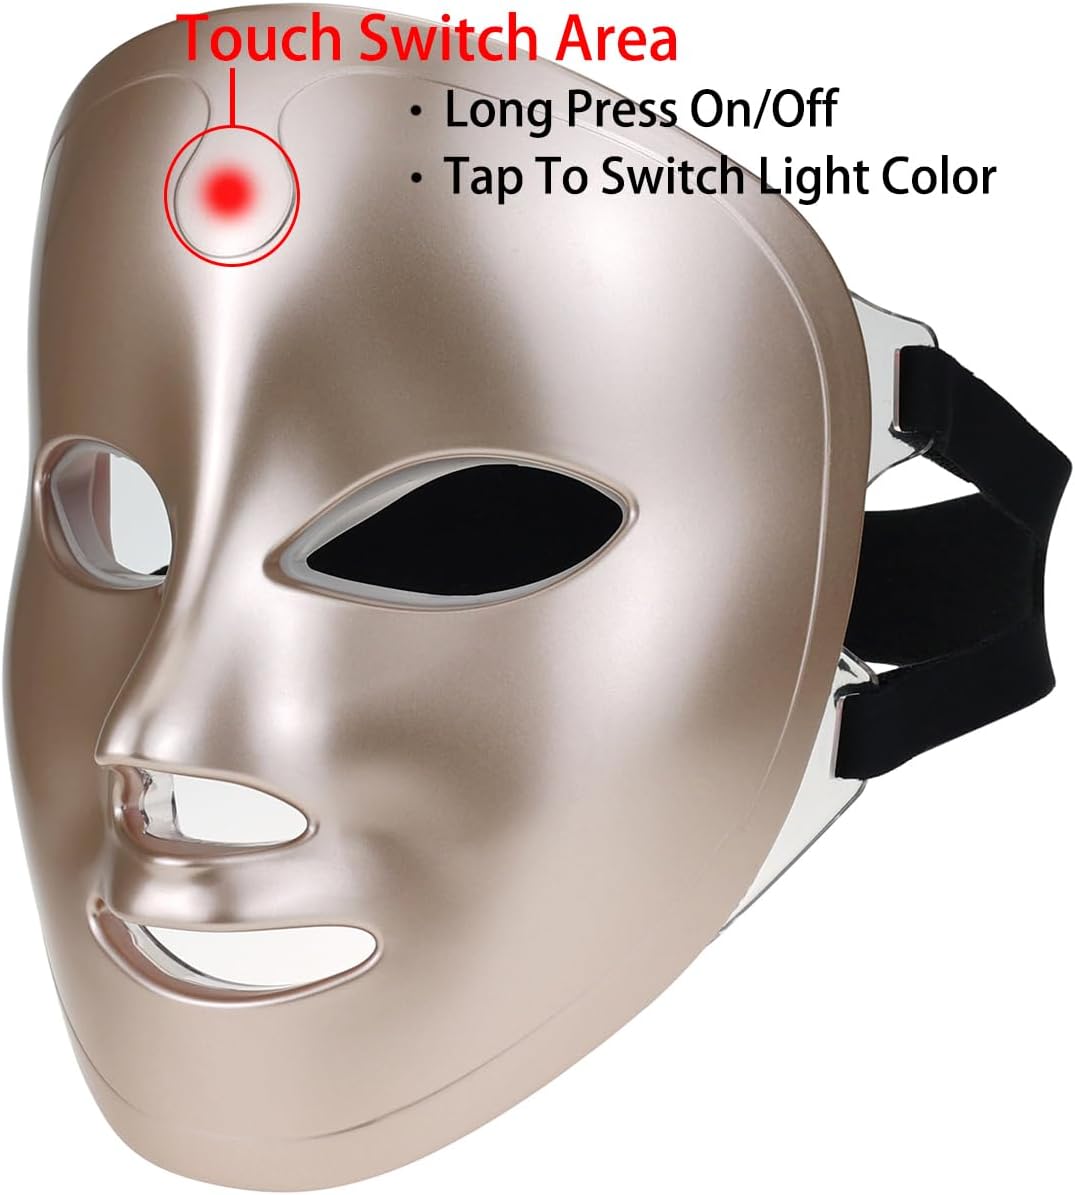 No Cables Led Face Mask Light Therapy, 7 Color Therapy Facial Skin Care Mask, Blue & Red Light Skin Care